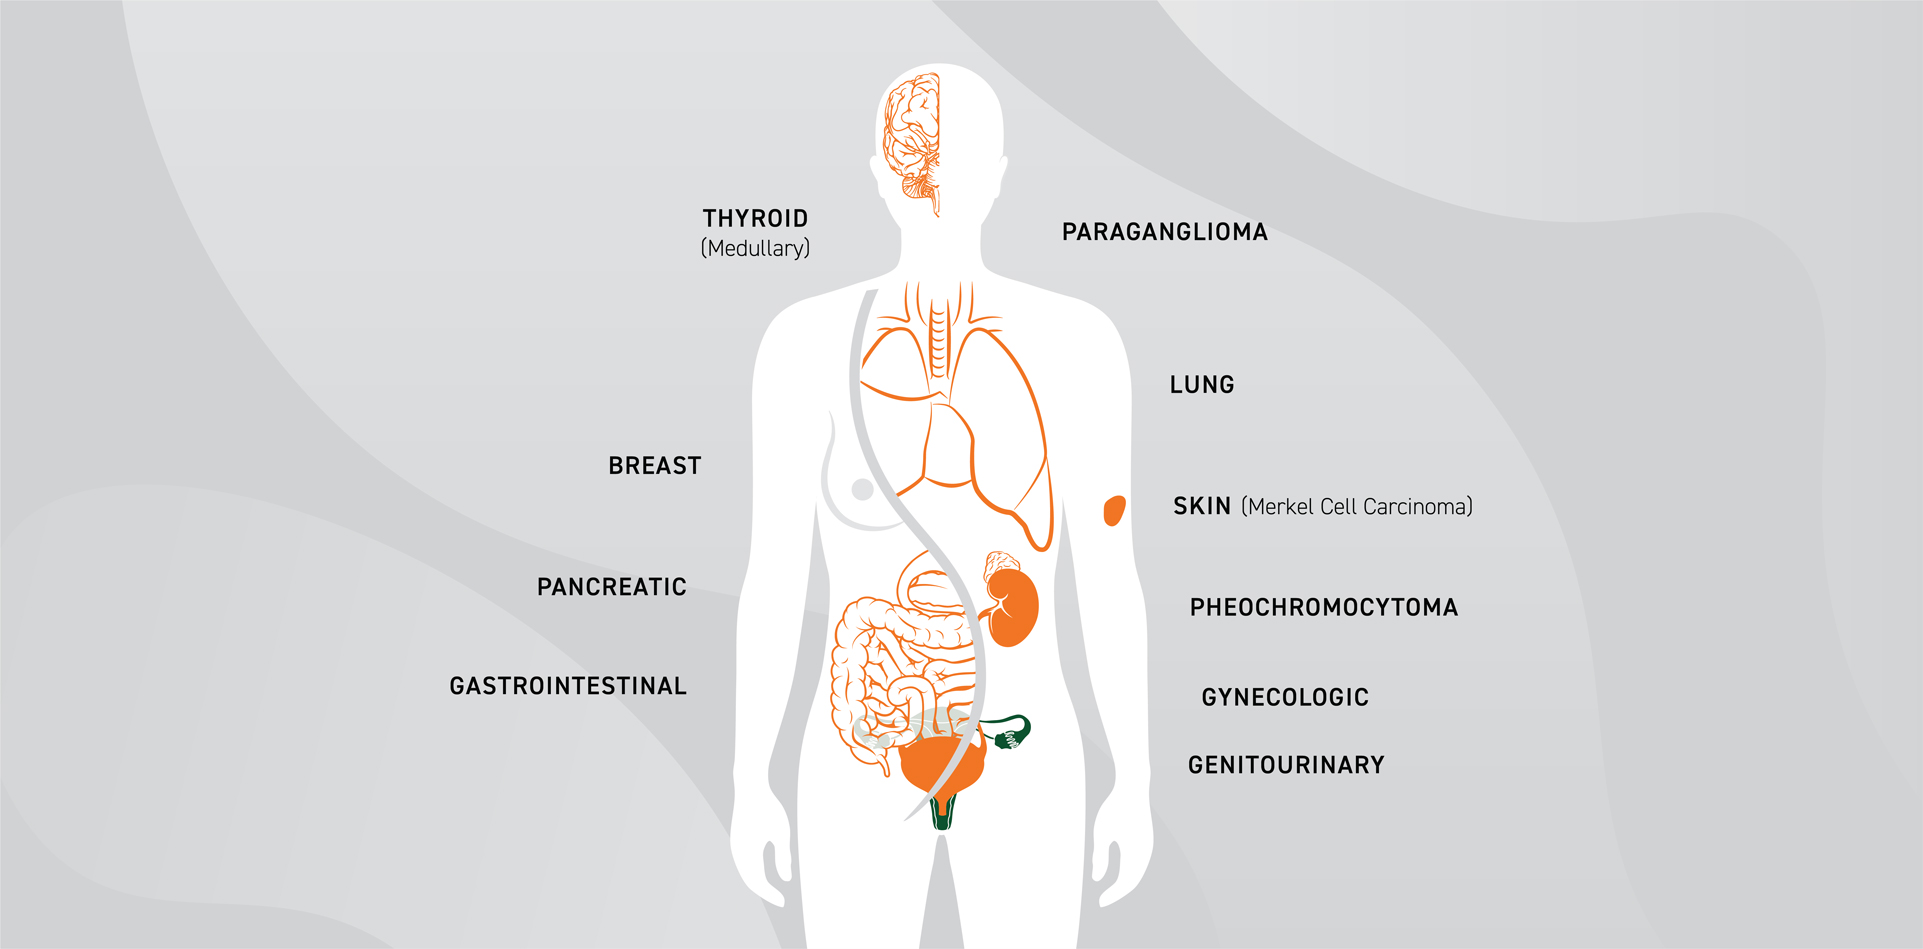 Diagram showing the various parts in the body where NET tumors are sometimes found